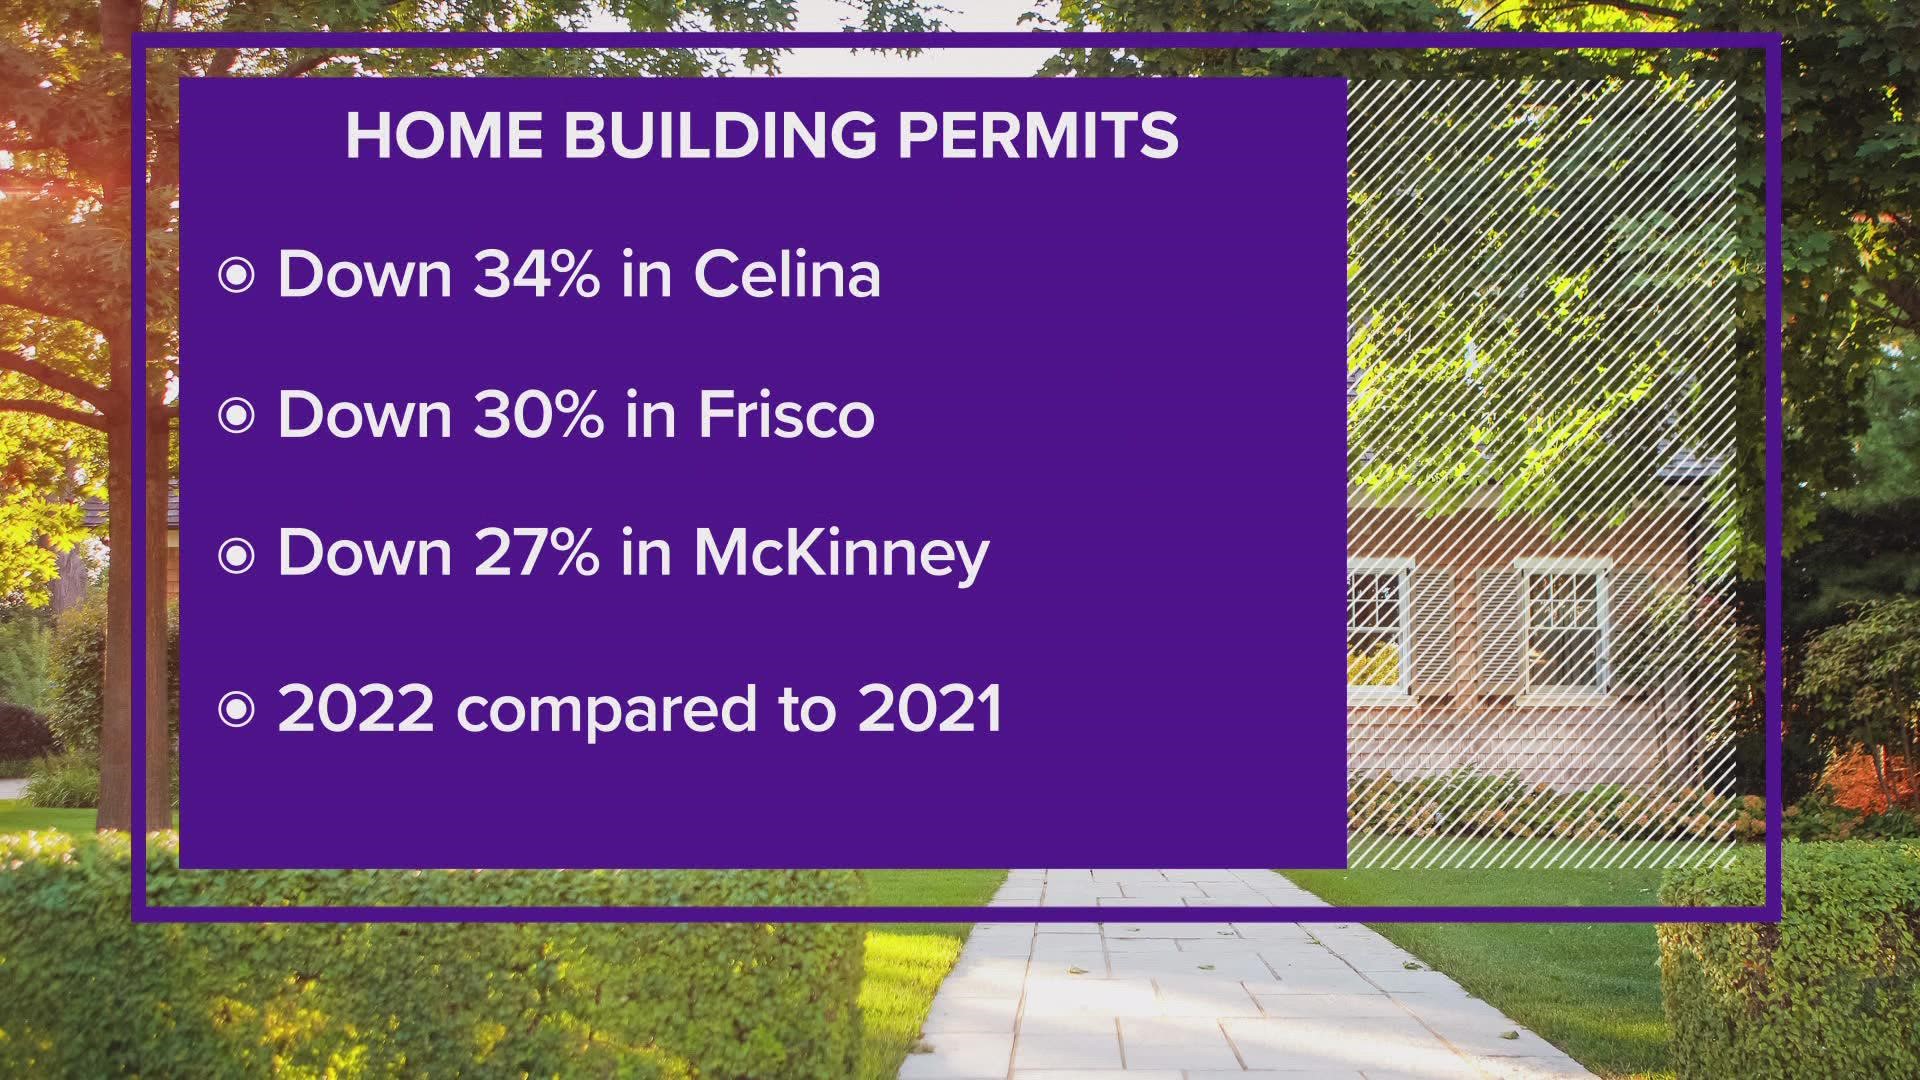 Permits to build houses were down 34% in Celina, 30% in Frisco, and 27% in McKinney in 2002 compared to 2021.